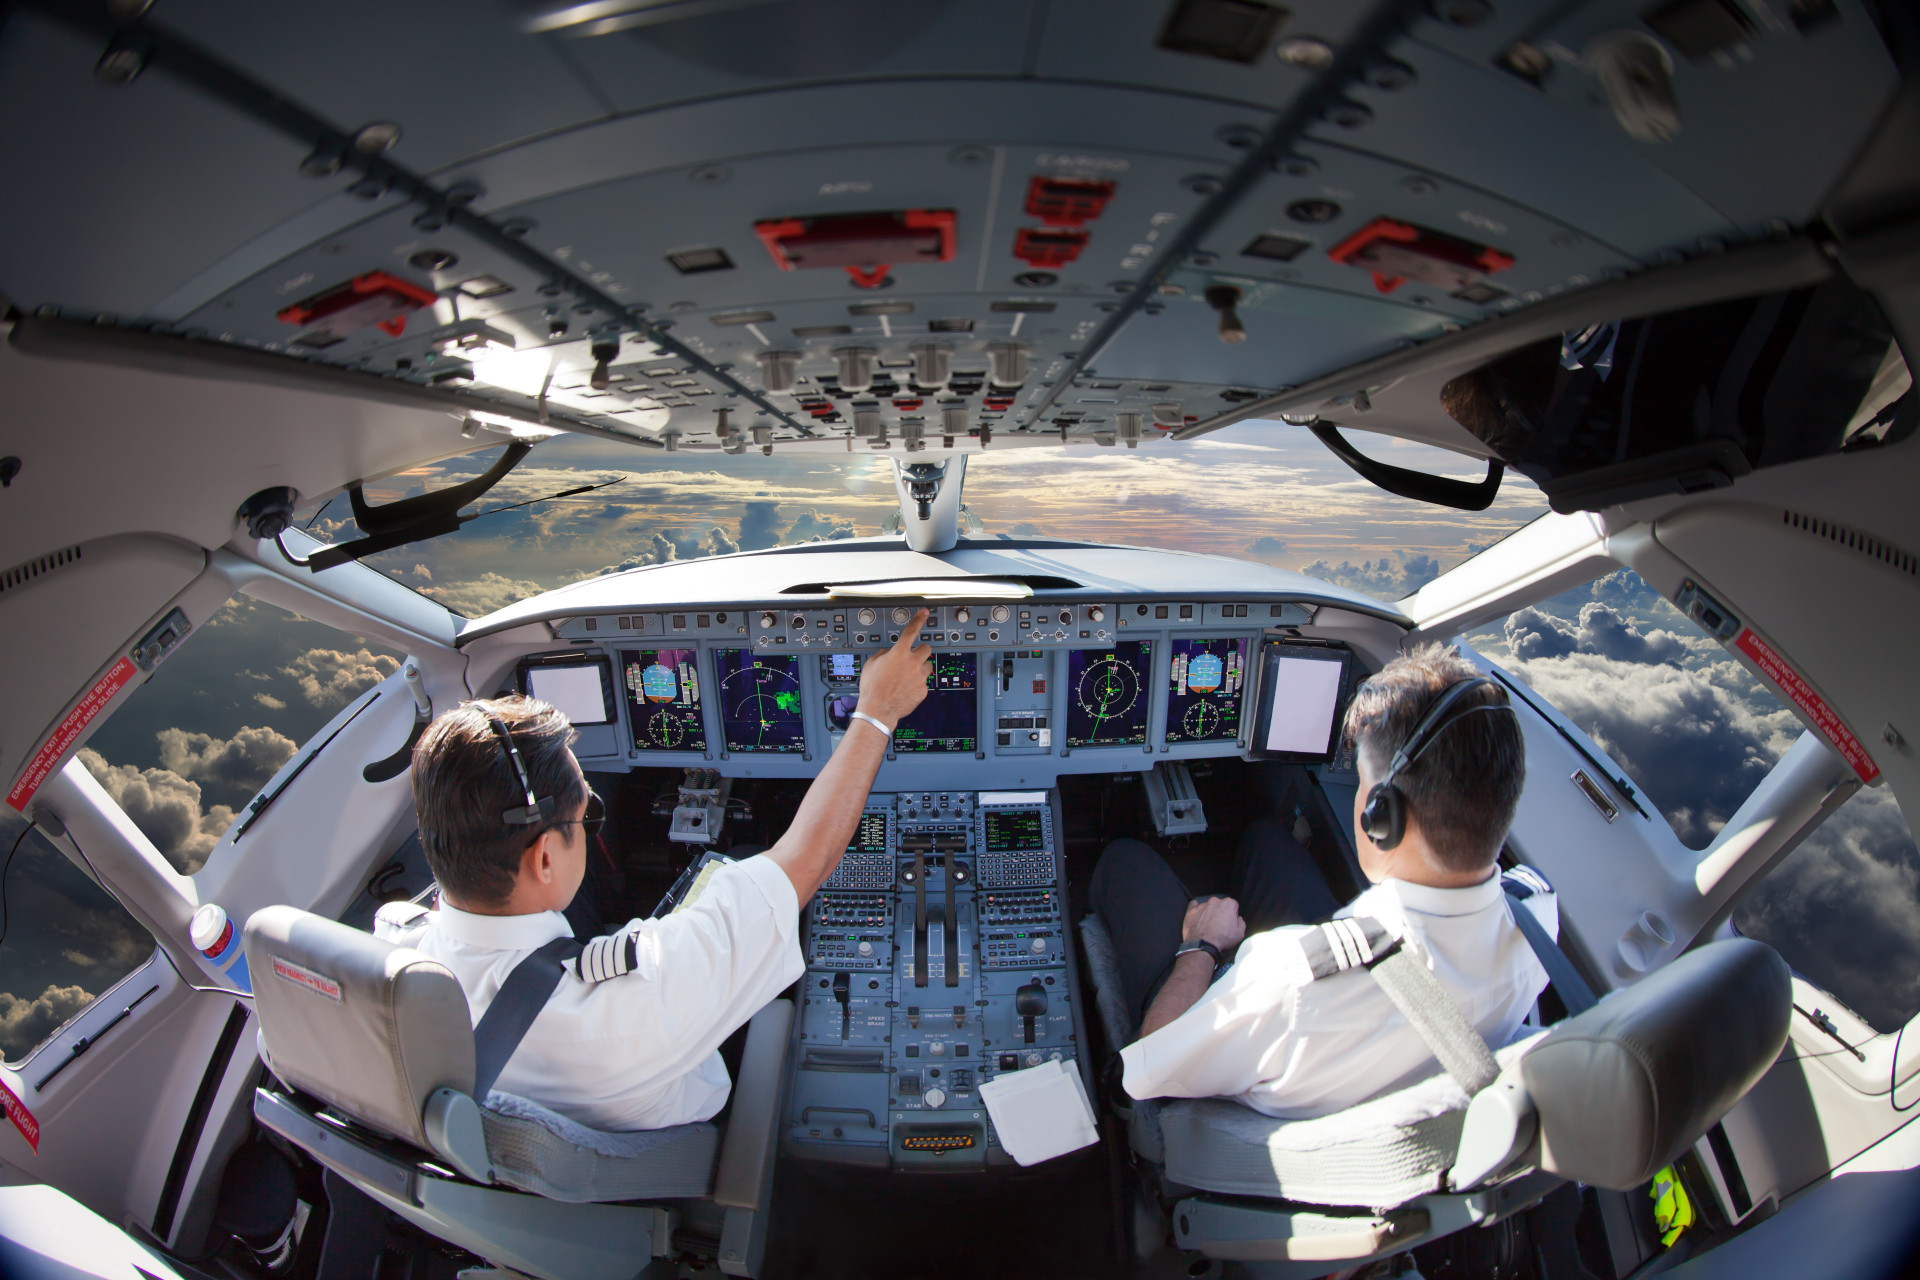 Apart from the discounted fares and travel perks, airline pilots also earn well—anywhere between US$100,000 to US$180,000, according to Time Money (although wages depend on many factors).<p>You may also like:<a href="https://www.starsinsider.com/n/417526?utm_source=msn.com&utm_medium=display&utm_campaign=referral_description&utm_content=240533v6en-sg"> How 2020 will be, based on your Chinese horoscope</a></p>